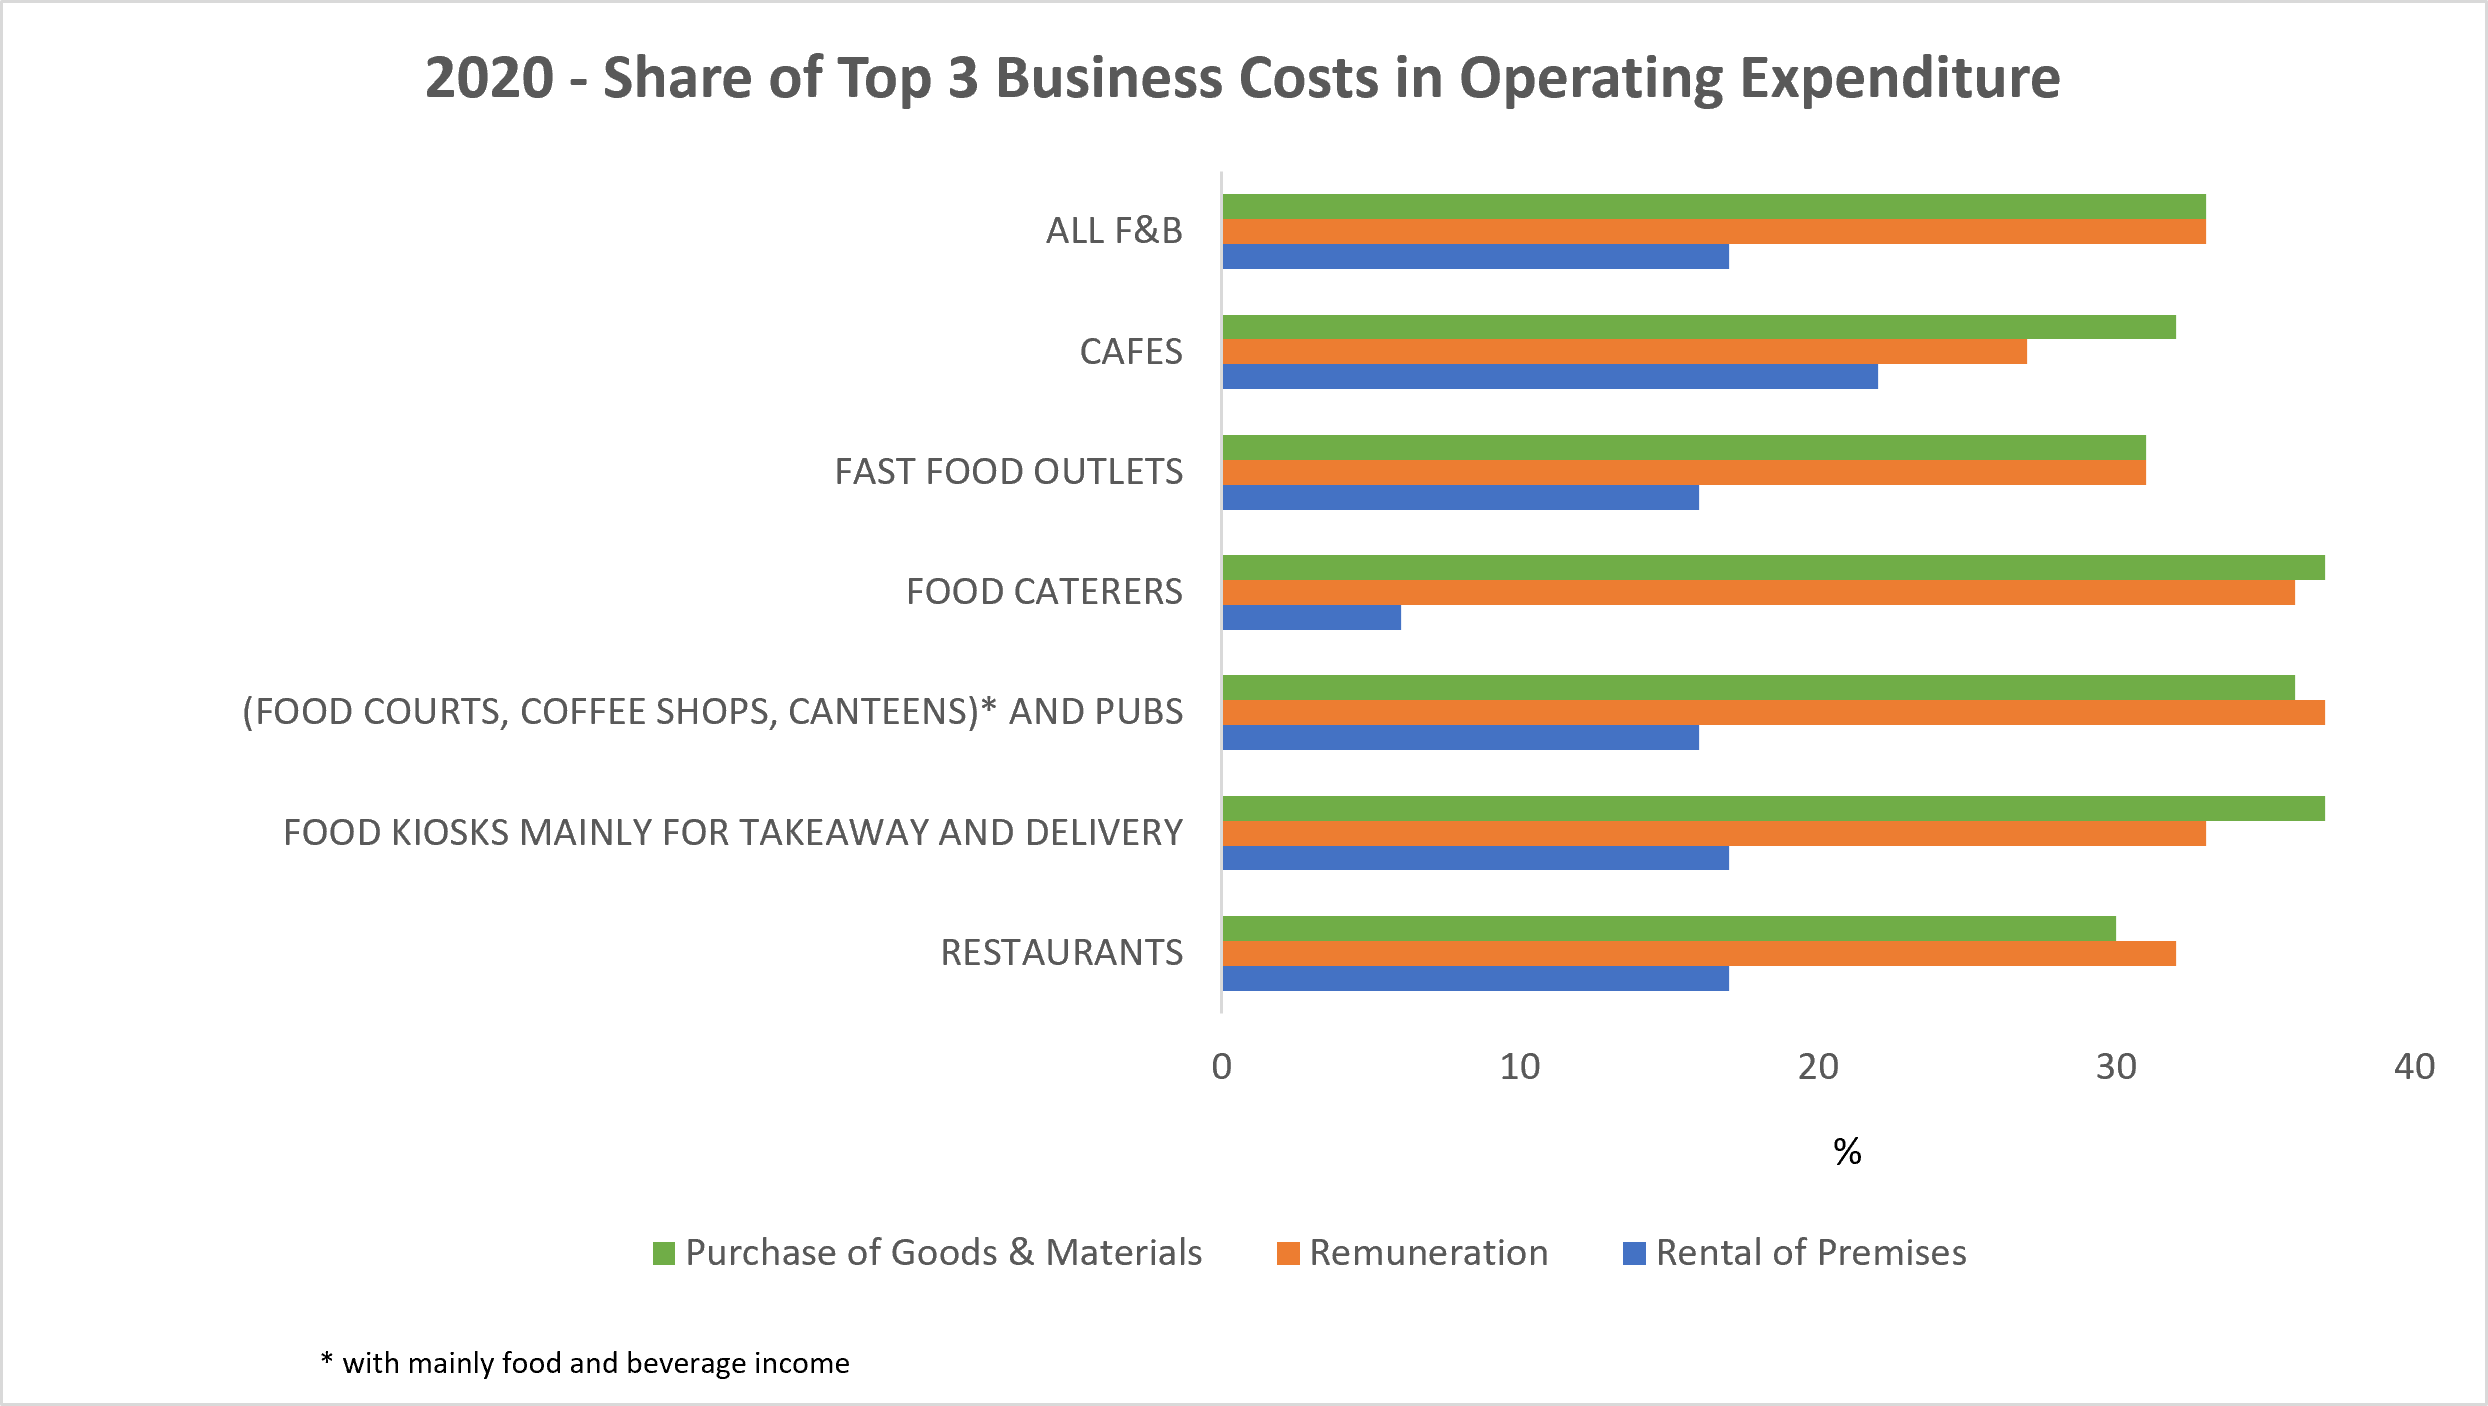 Top three business costs in operating expenditure for F&B businesses